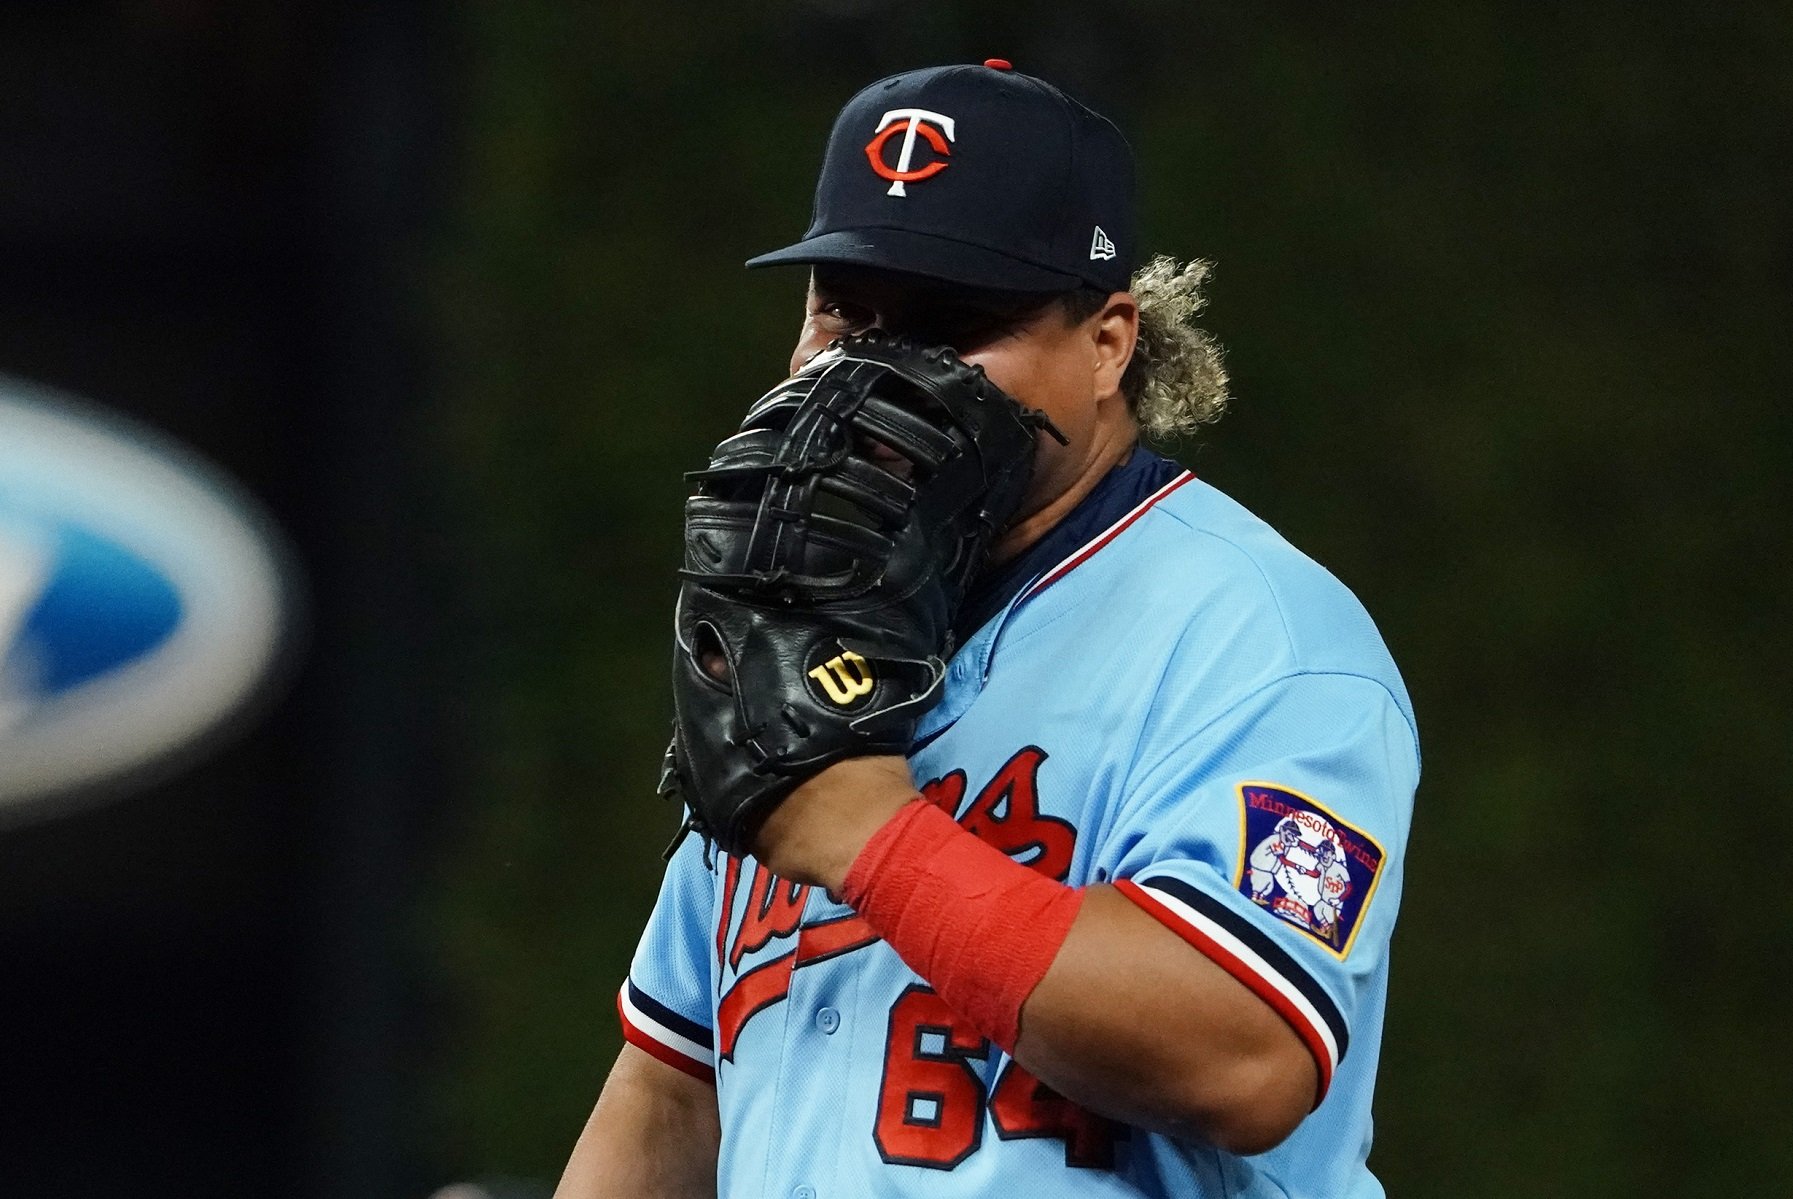 Williens Astudillo back for MN Twins